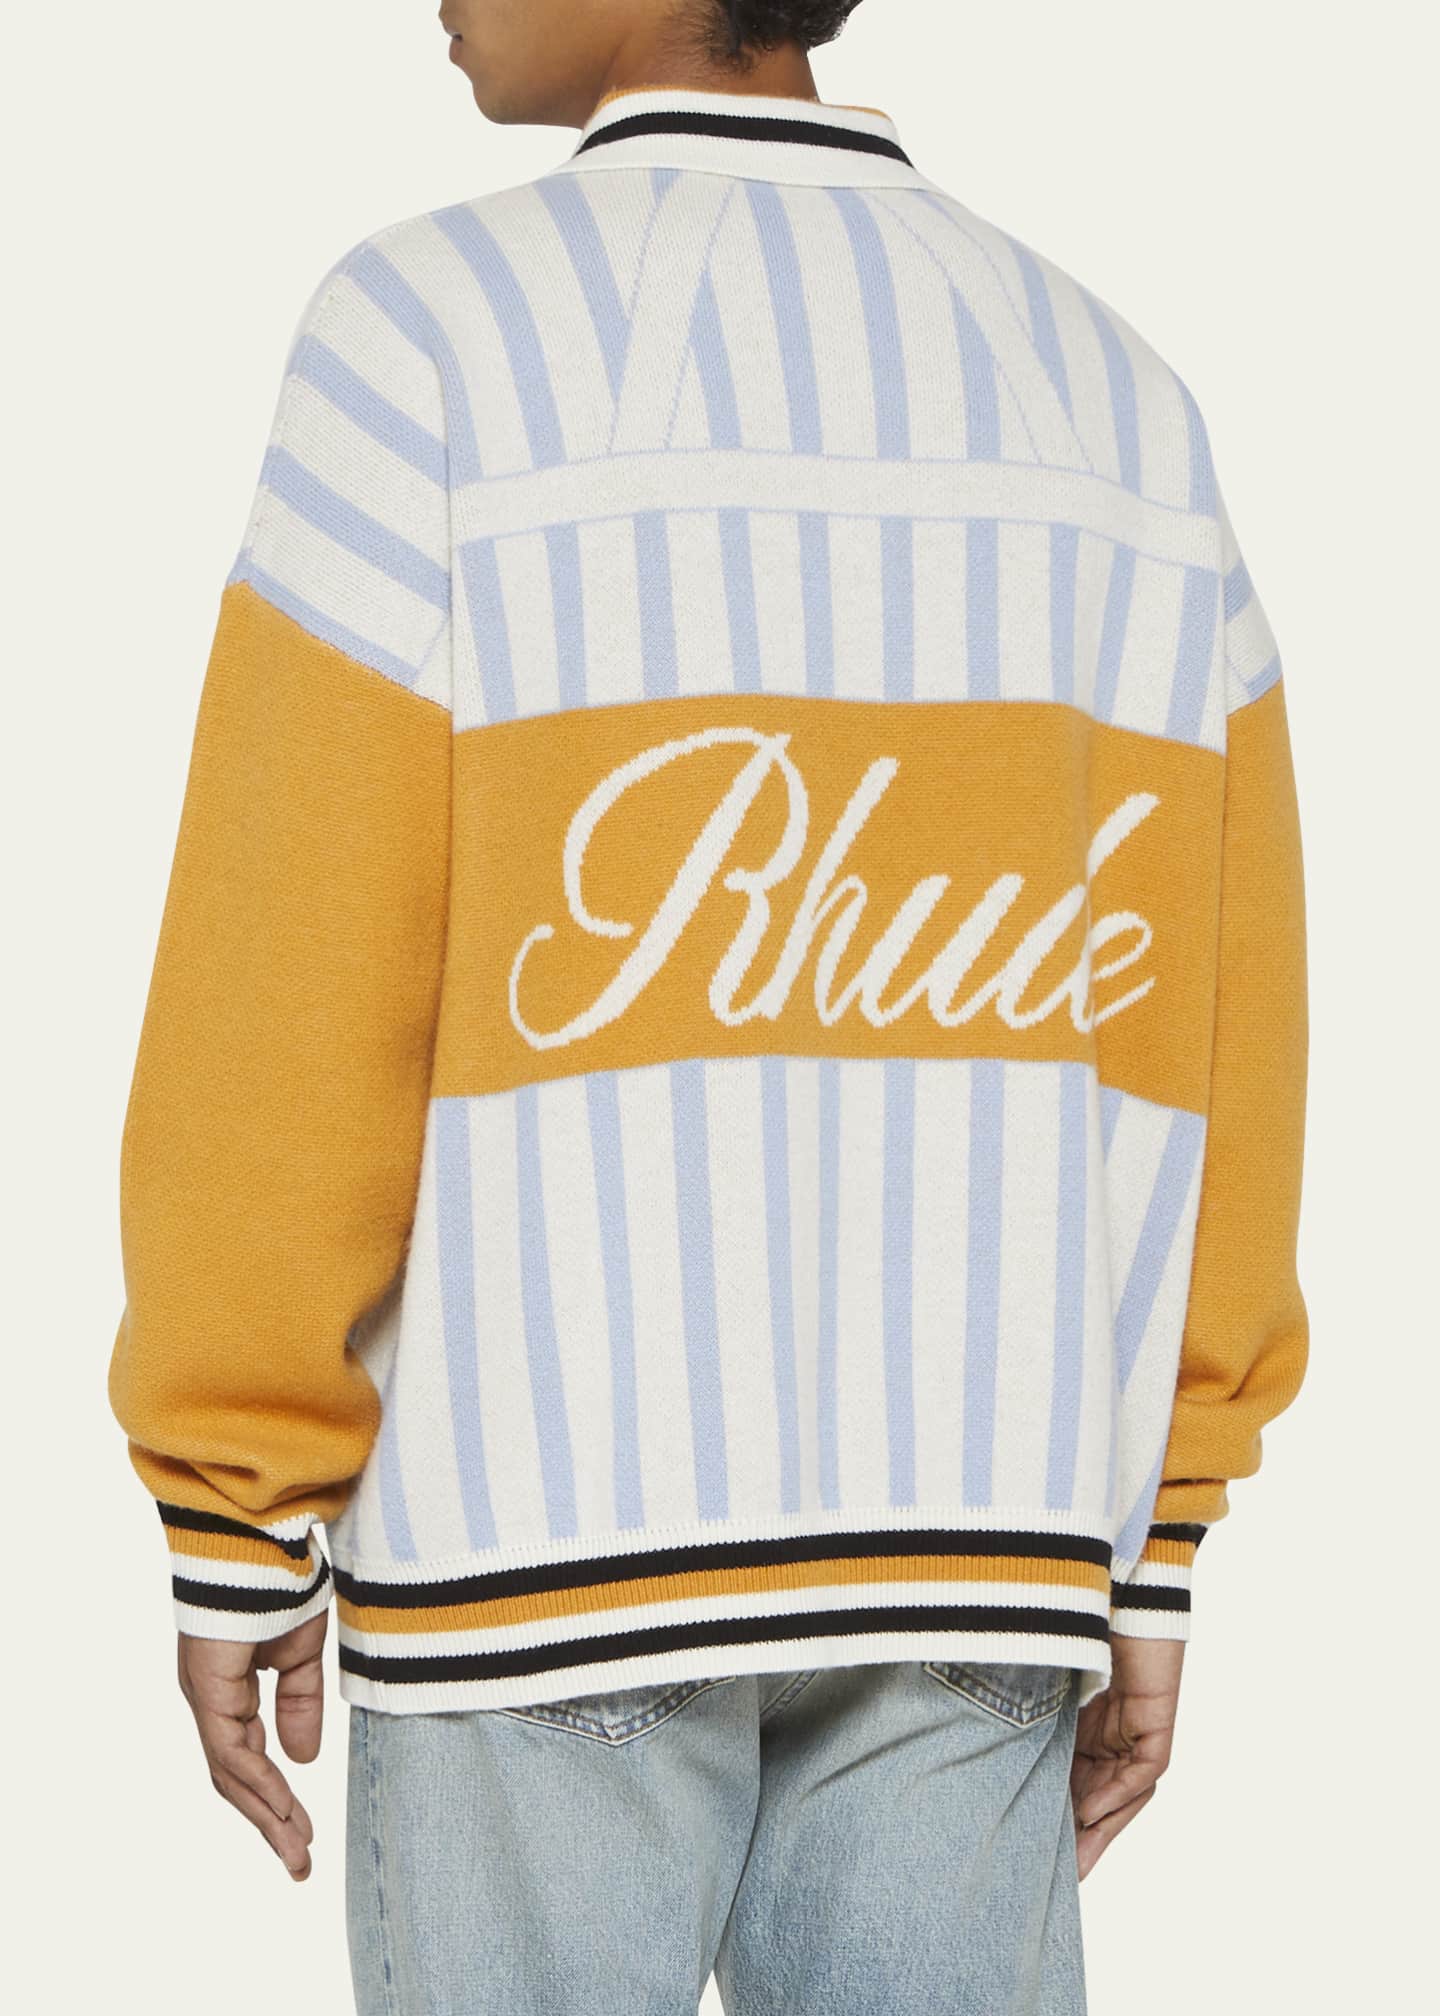 Rhude Men's Rugby Striped Knit Polo Sweater Bergdorf Goodman